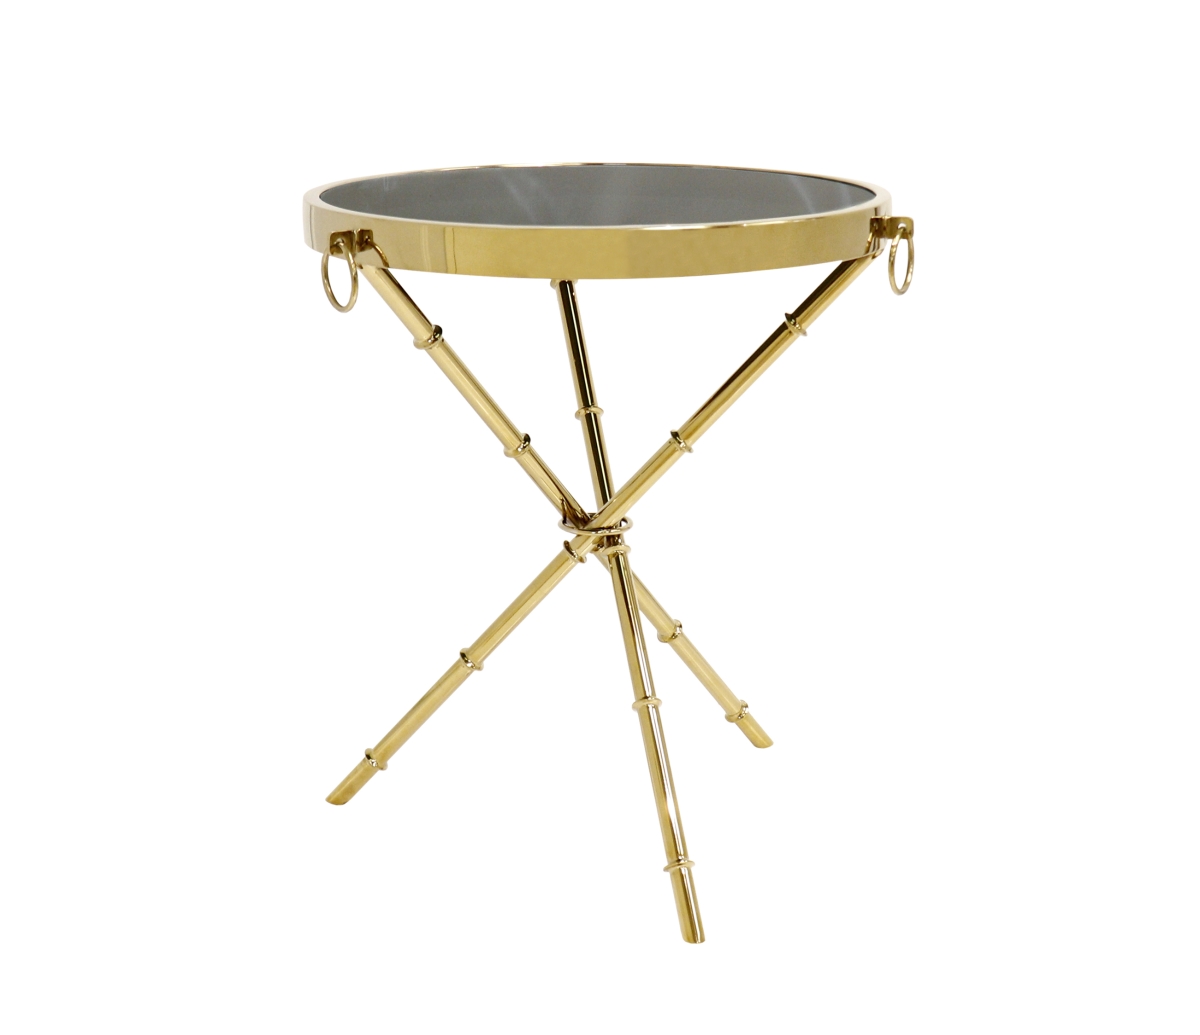 Ar-z0189gl Vicenza Collection Side Table, Gold - 20.47 X 20.47 X 23.62 In.